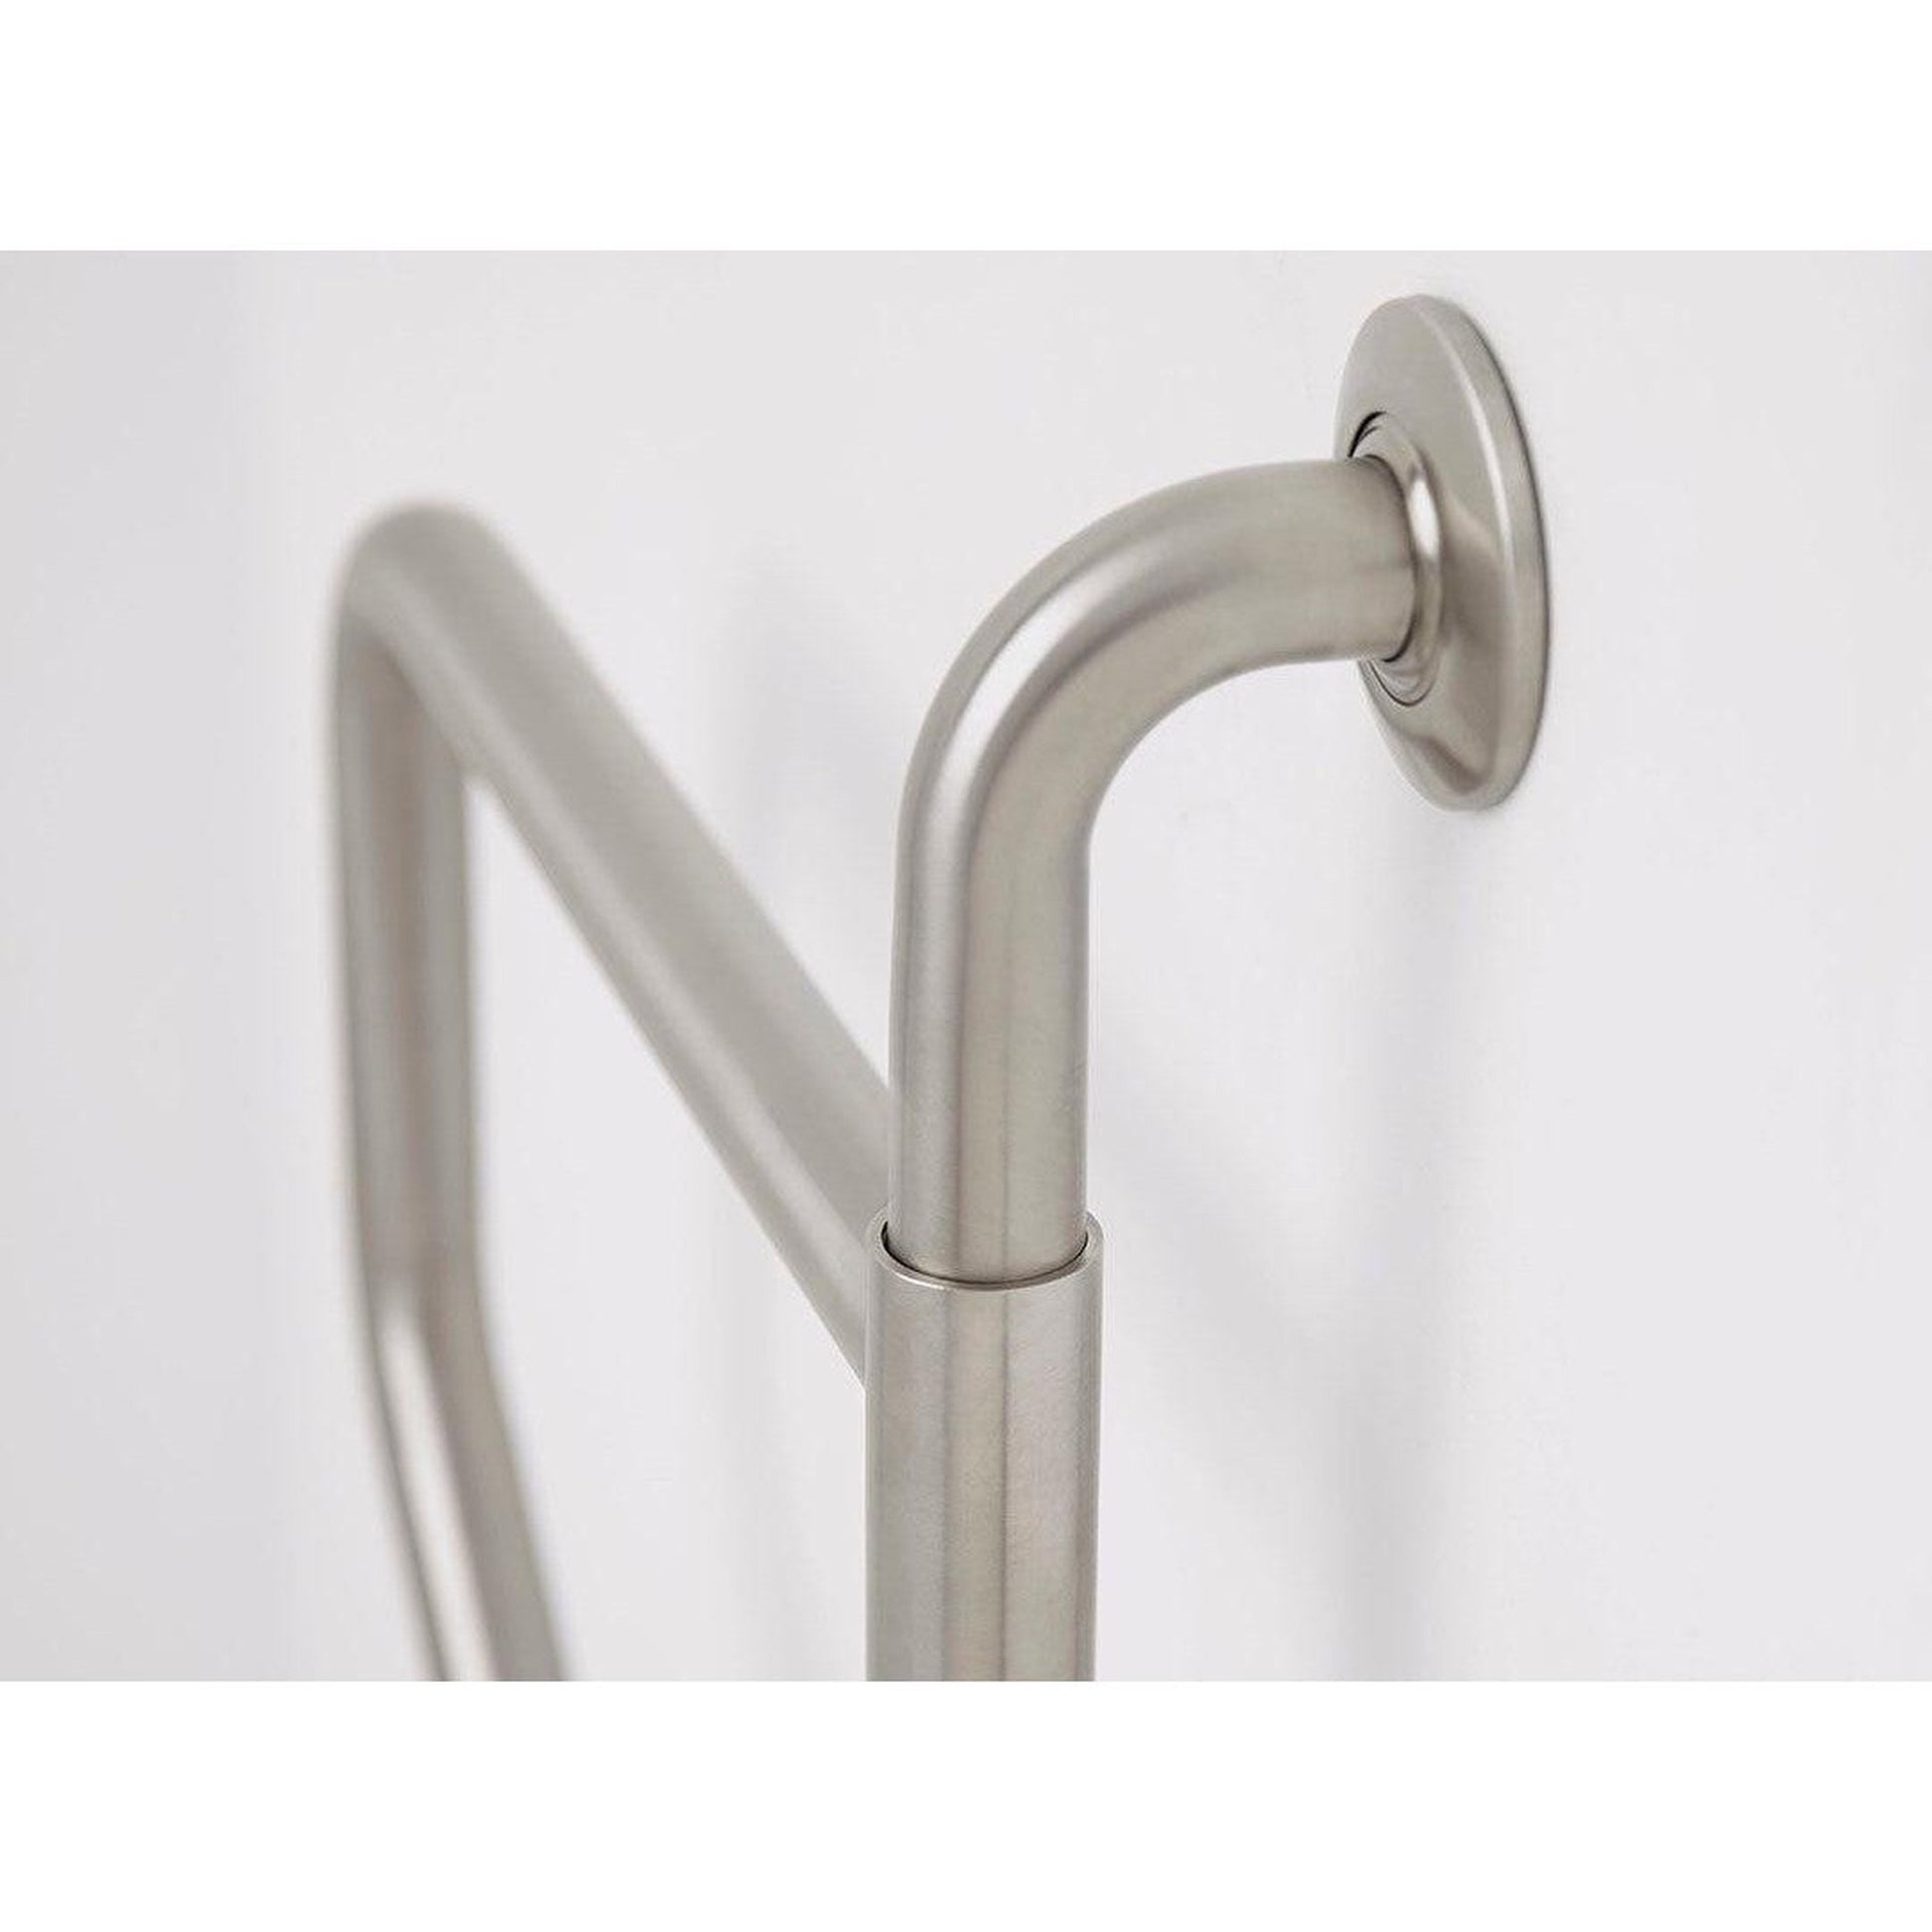 Seachrome Lifestyle & Wellness Series 36" Polished Stainless Steel Wall-To-Wall Swing Away Grab Bar